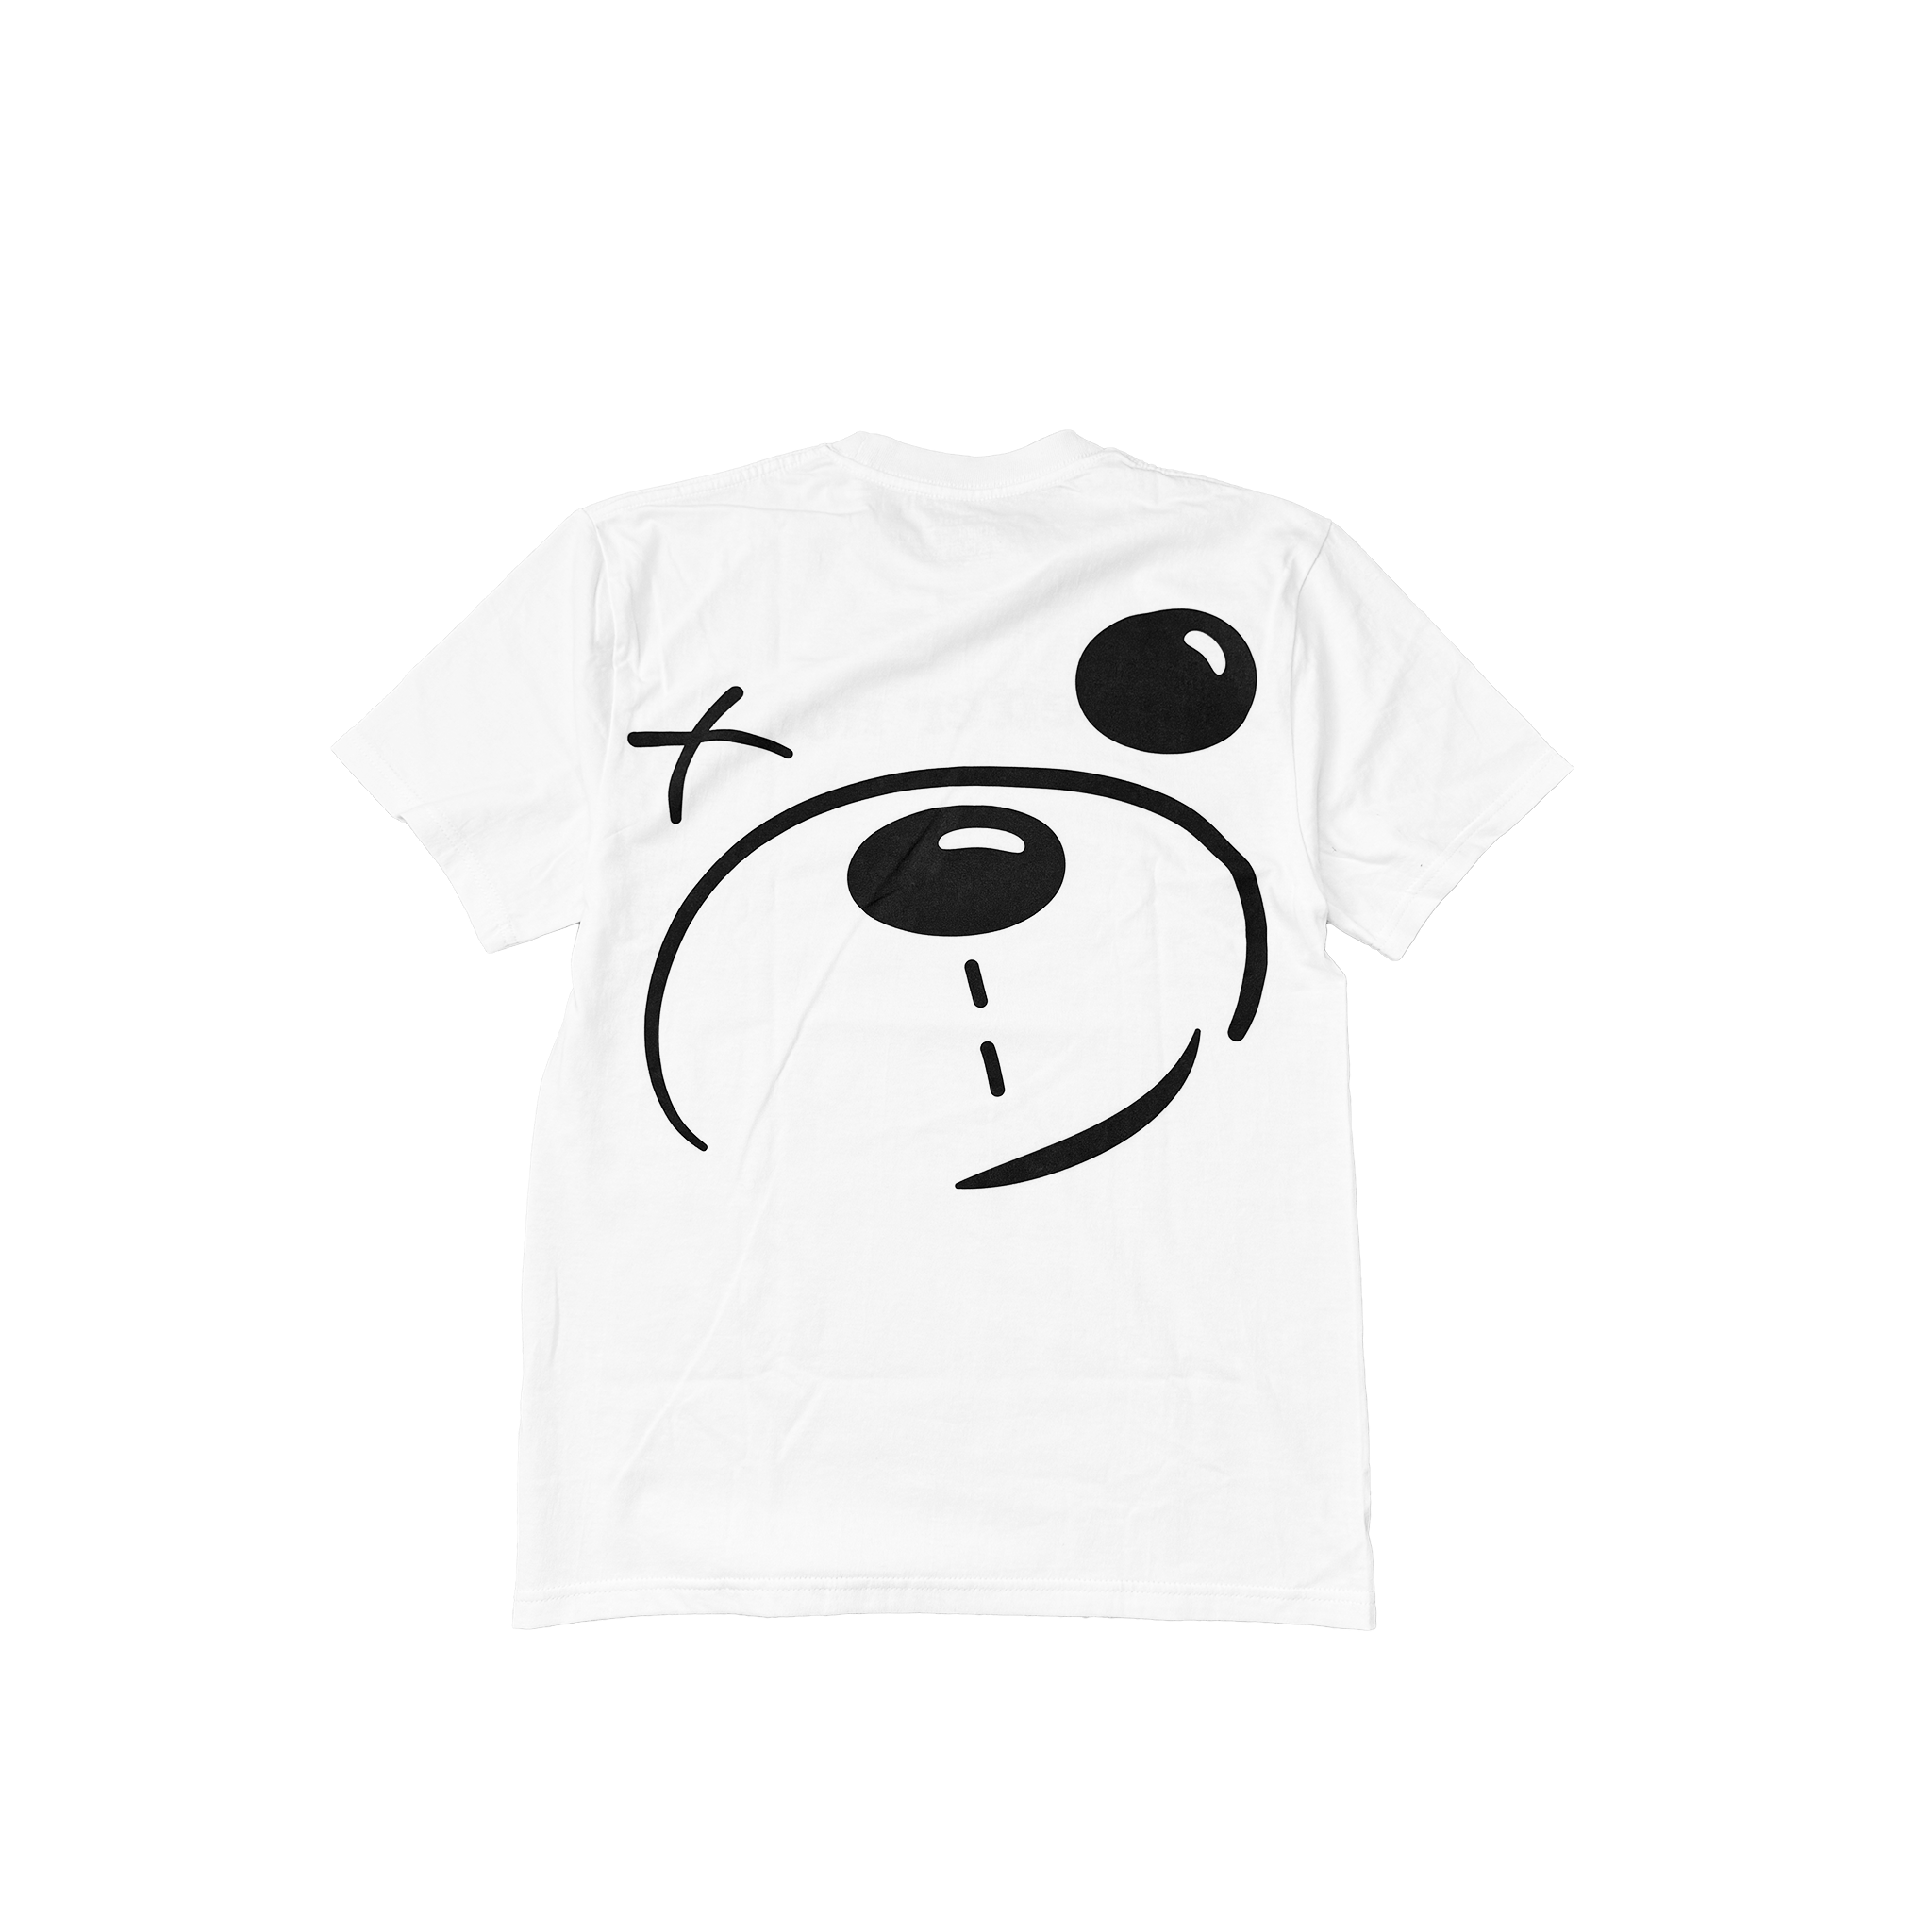 A white oversized Better not Bear Face Tee, featuring a large snout, eyes, and a winking expression, laid flat on a grey surface.